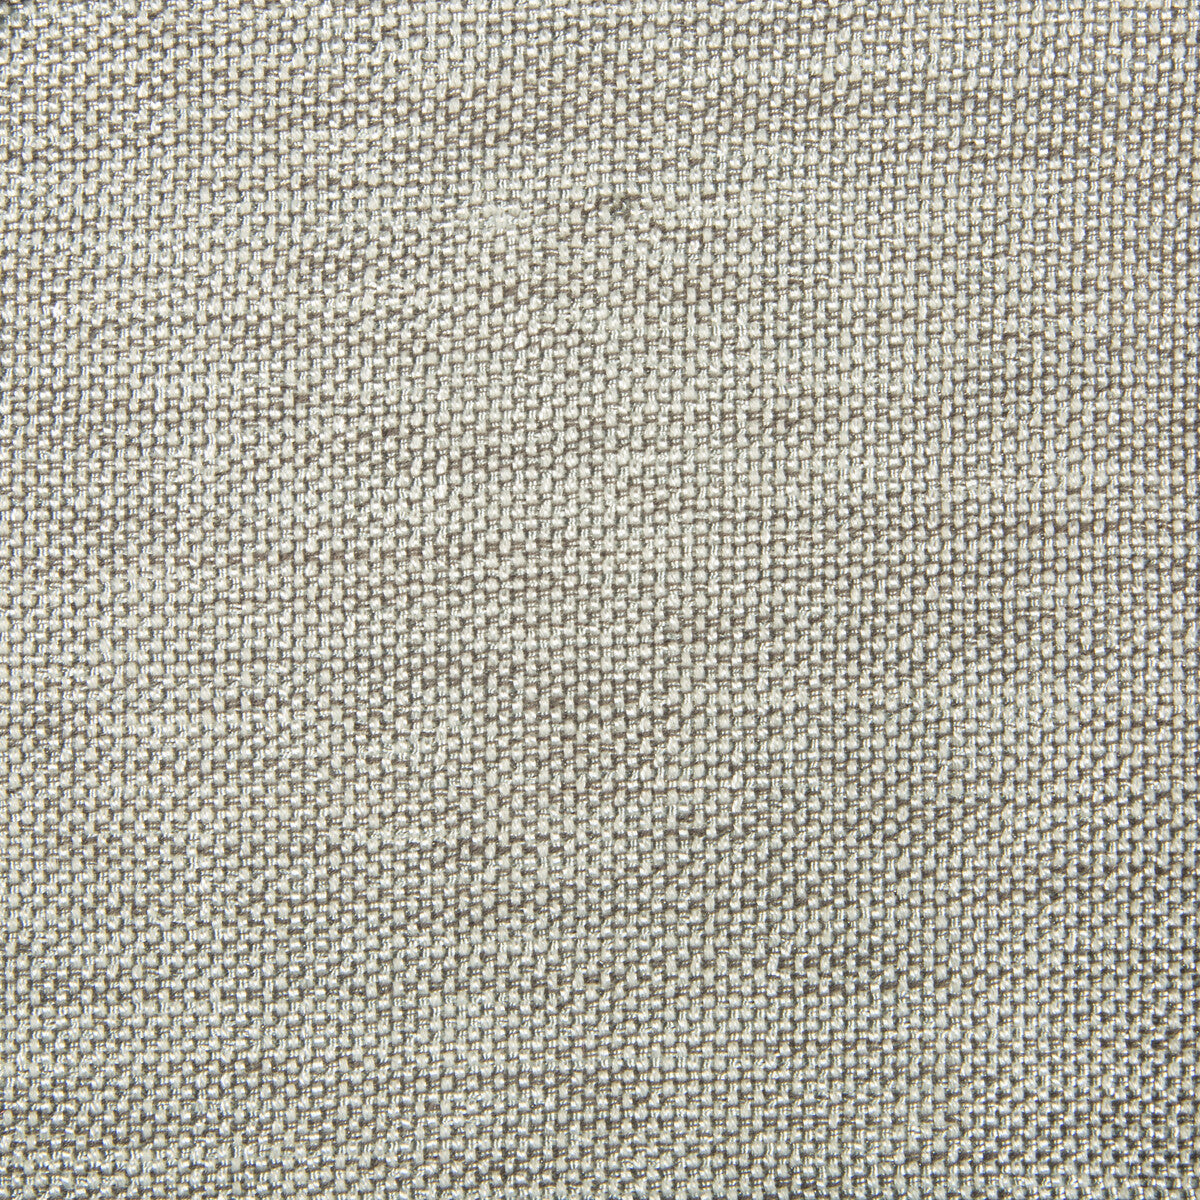 Kravet Contract fabric in 34926-1121 color - pattern 34926.1121.0 - by Kravet Contract